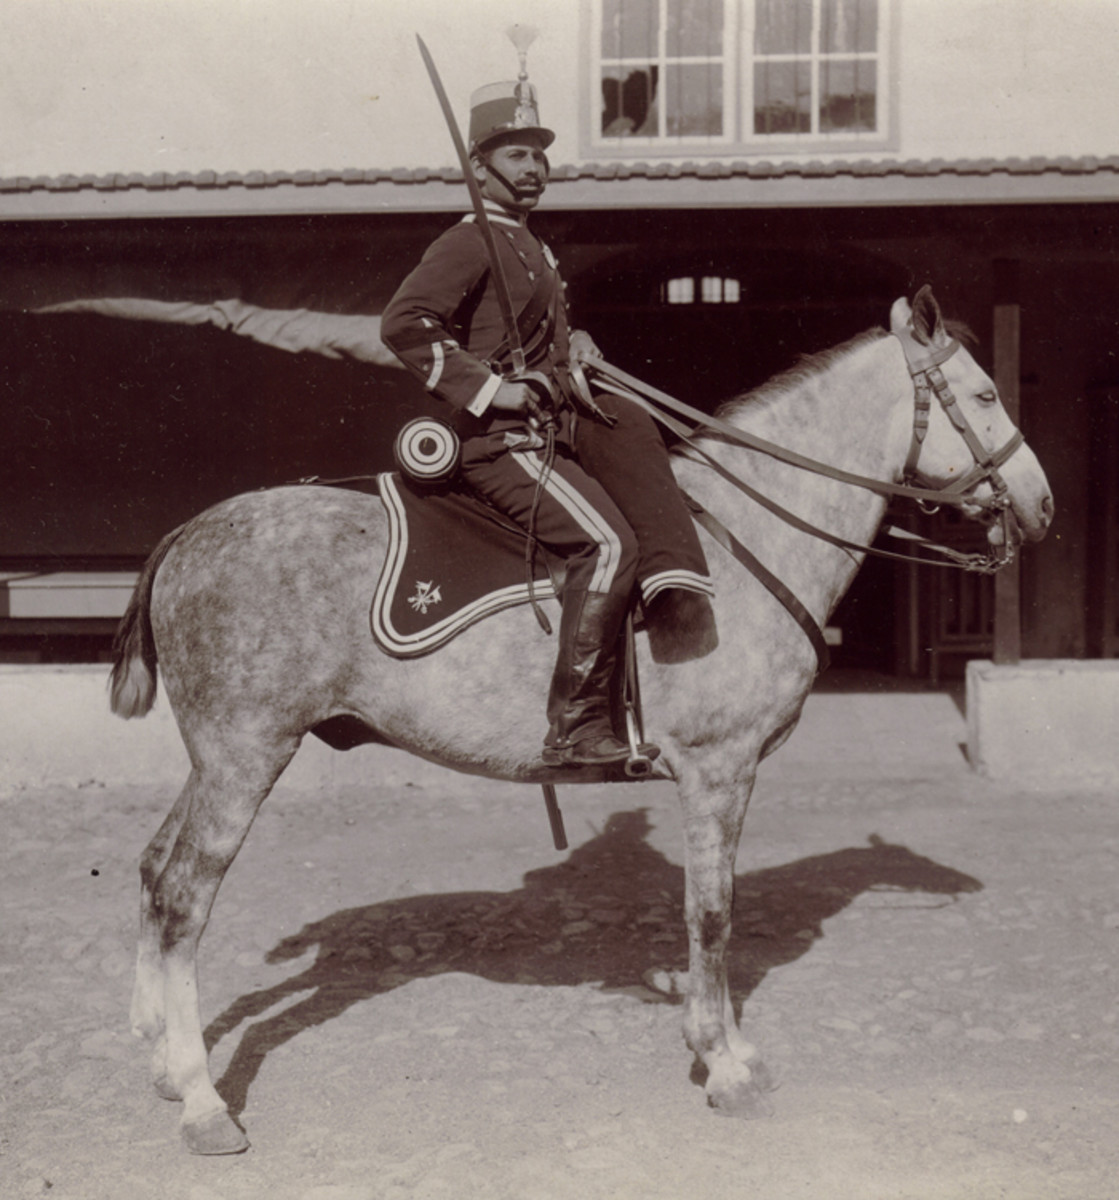 A 1907 dated image of  a Light Cavalryman. This time from a regiment that wore a silver trimmed sky blue shako. The headgear of the Cazadores de Caballería ran the spectrum from shako to fur busby to metal spiked helmet depending on the regiment. The uniform is sky blue trimmed white. His mount is decked out in  regulation horse furniture, also sky blue with white trim and the Cavalry branch insignia. He is armed with a Model 1895 Cavalry saber.